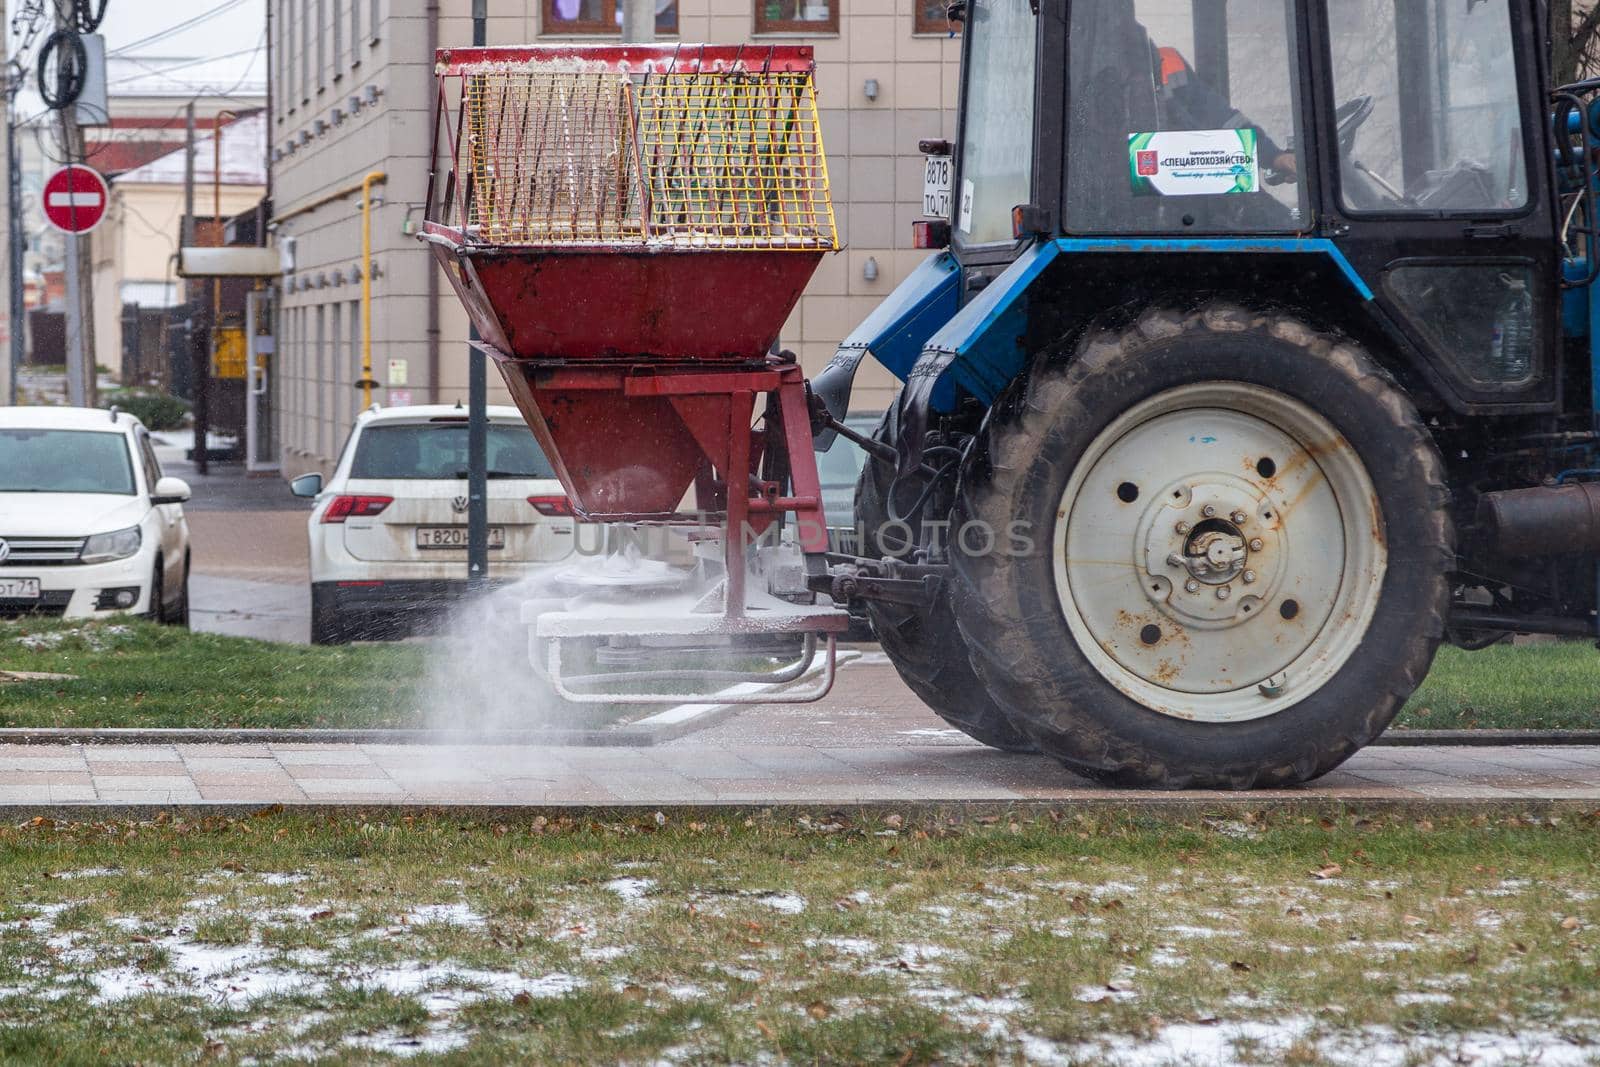 TULA, RUSSIA - NOVEMBER 21, 2020: Tractor spreading salt reagent on city pavement at winter daylight. by z1b